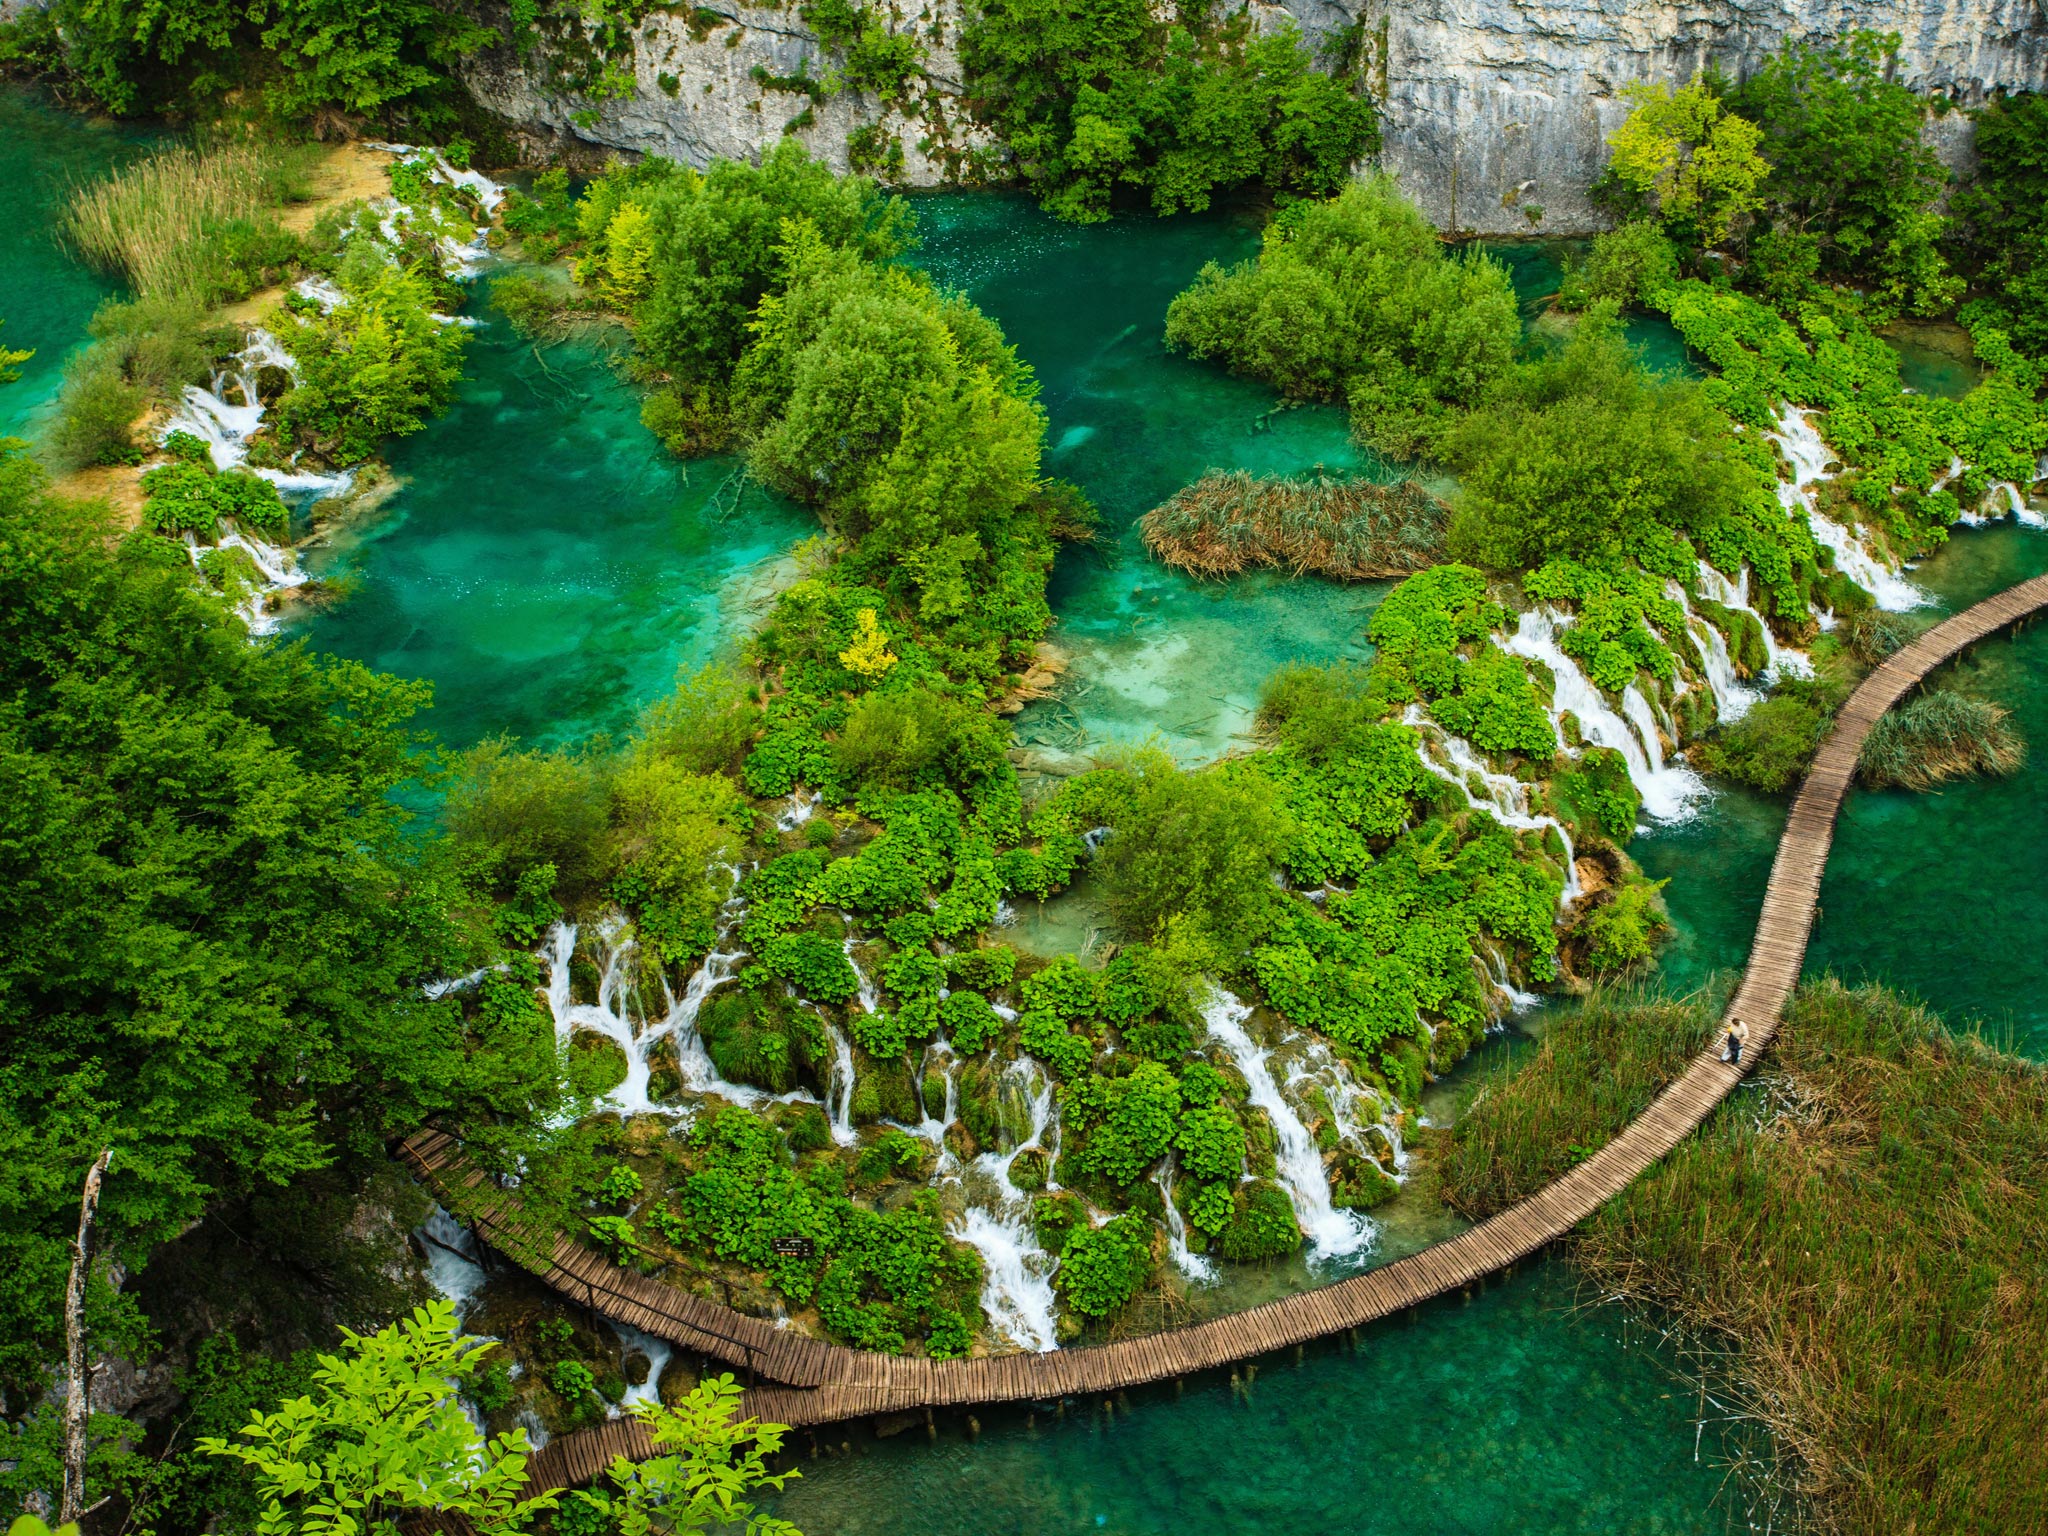 The waters flowing over the limestone and chalk have, over thousands of years, created a series of beautiful lakes, caves and waterfalls